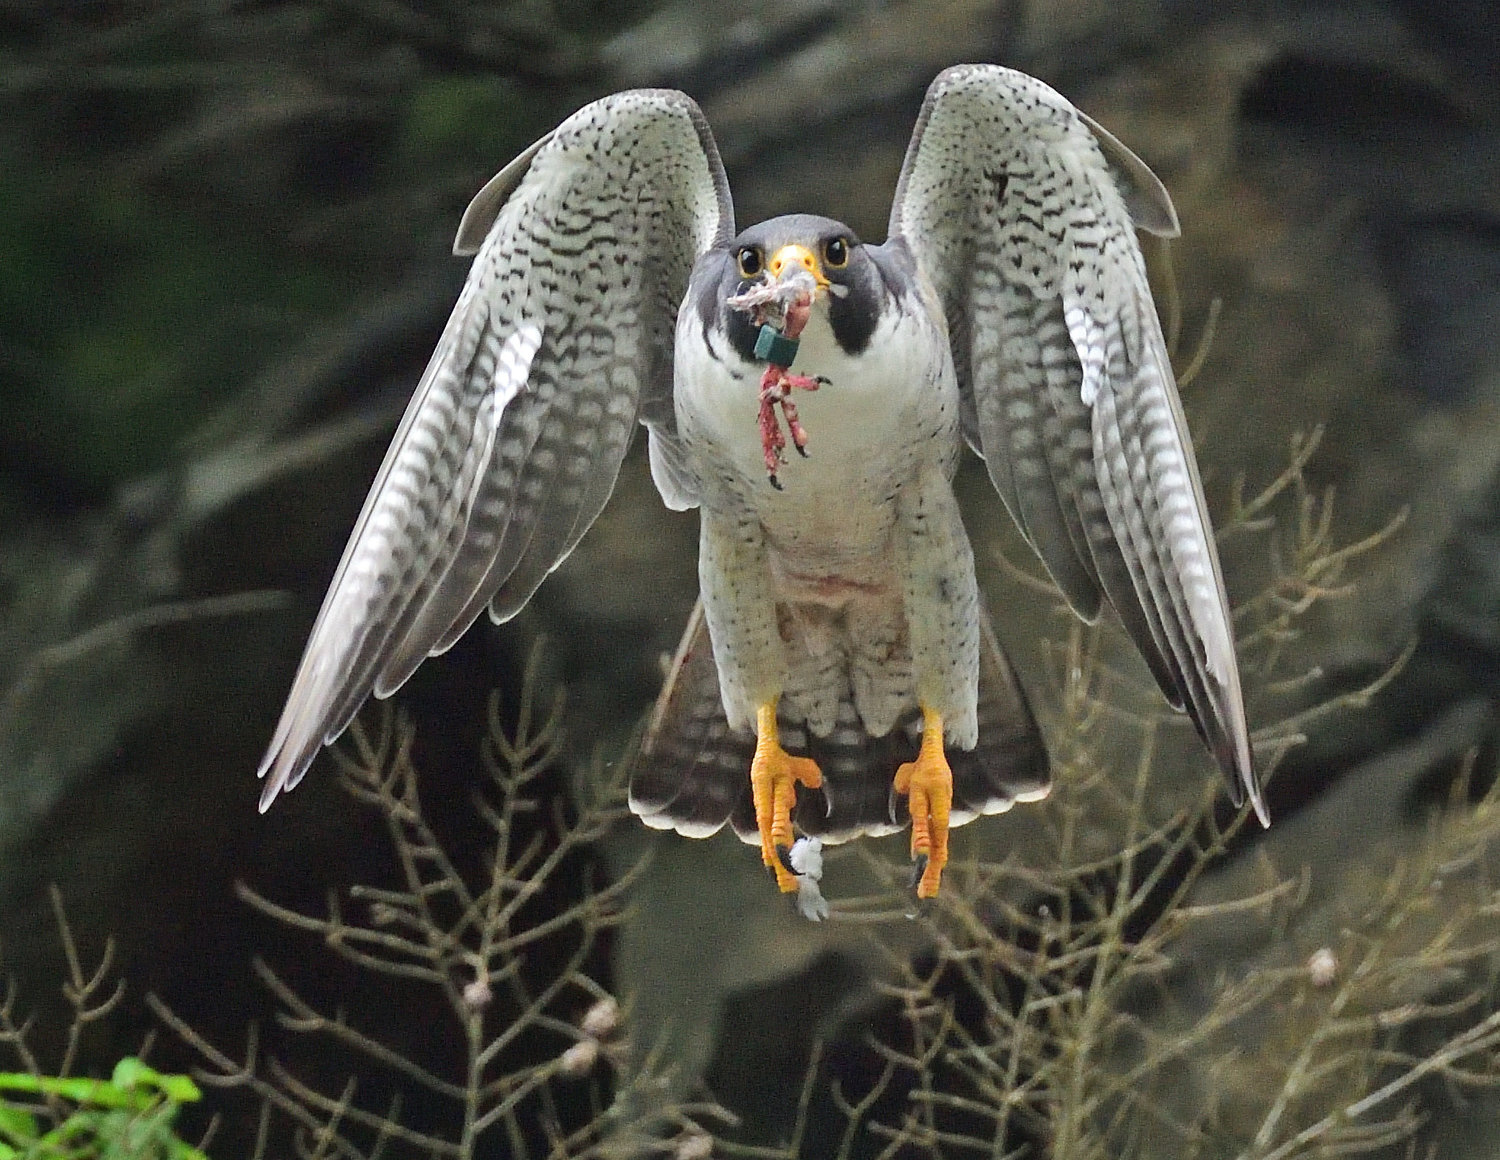 This adult peregrine had left its perch with the remnants of a couple of prey items flown around to entice the young. Sticking out if its bill is a foot with a leg band attached to it. It probably belonged to a pigeon. During this time, adults will bring prey items to a ledge away from the young are and then start eating. This may entice a young to fly over to the adult’s location in order to partake.